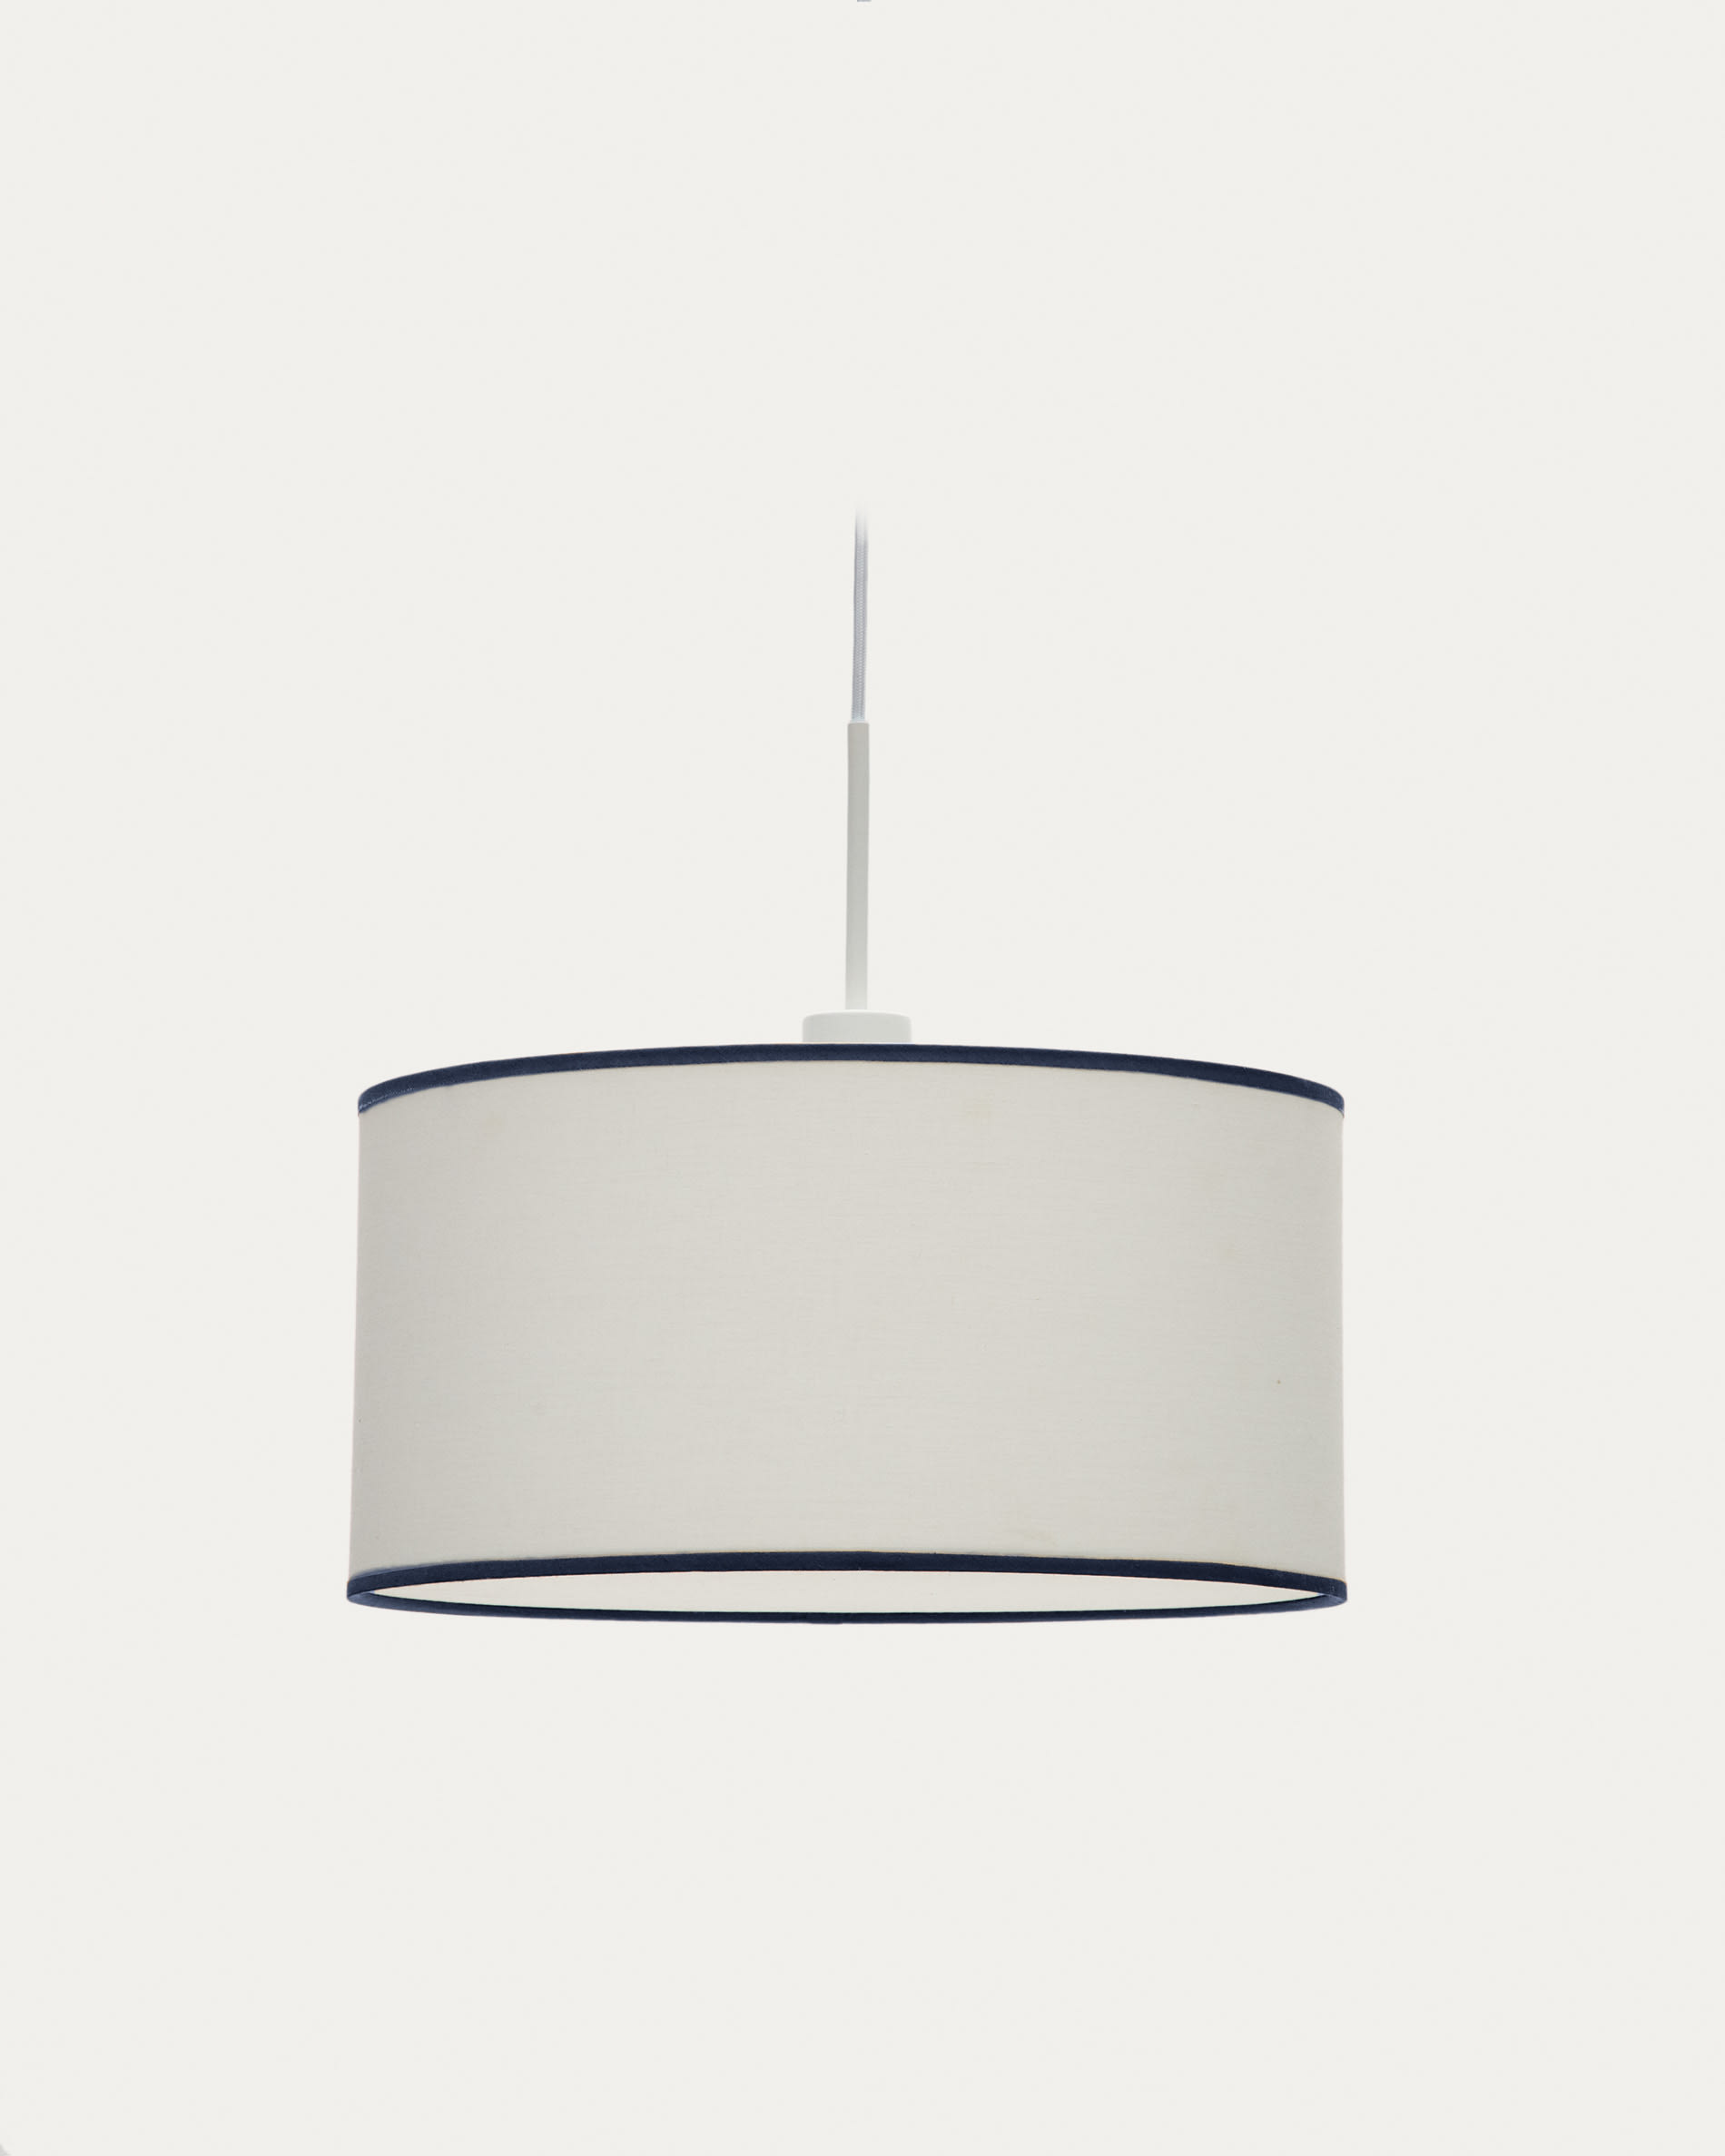 hazlo plano Acusador bloquear Binisalem ceiling lamp shade in white and blue Ø 40 cm | Kave Home